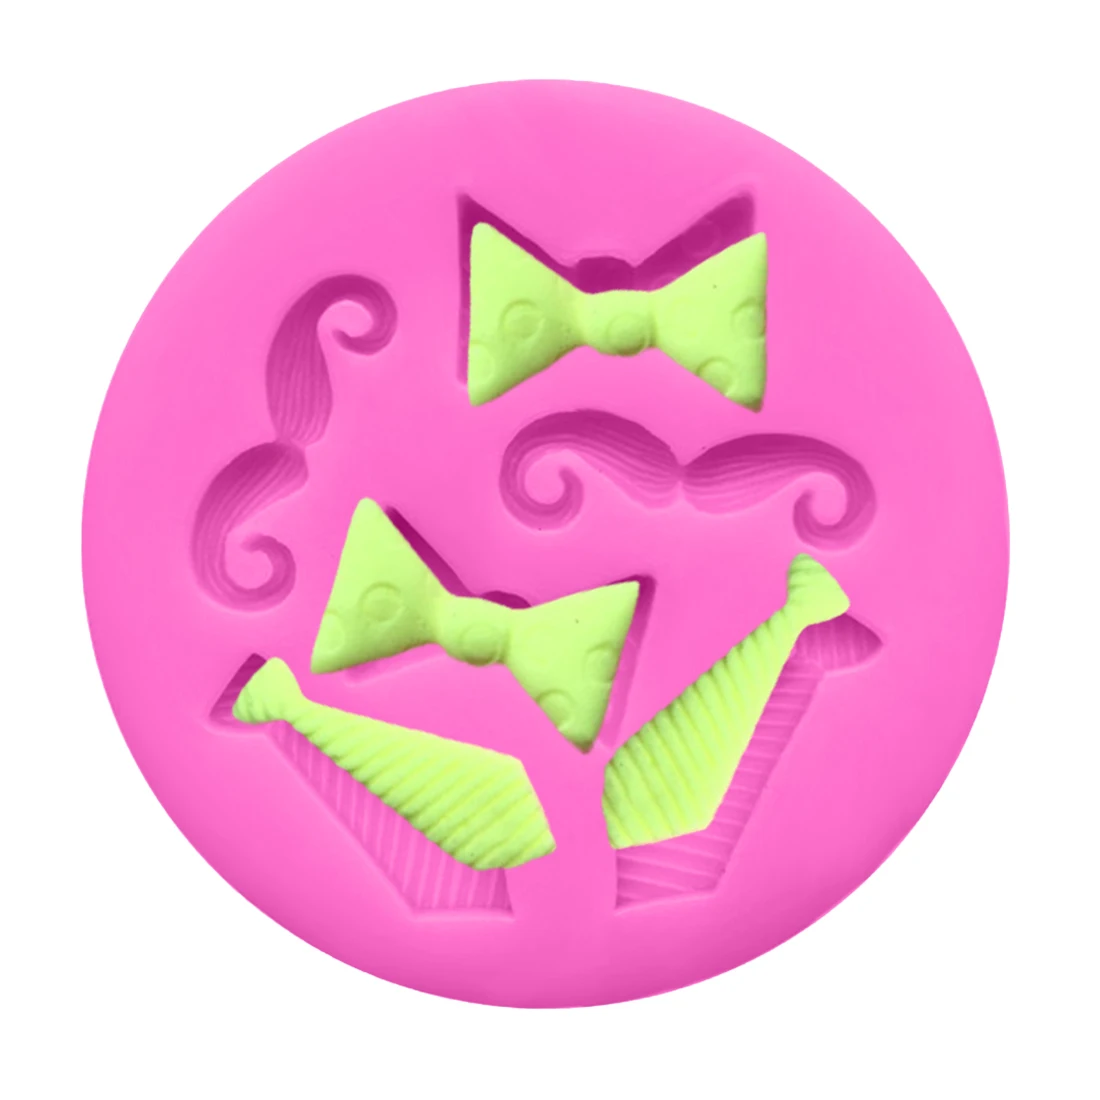 

Hot Sale 6-Cavity Tiny Bow Tie Mustache Cake Tools Silicone Mold for Fondant Sugarcraft Mould Gum Paste Chocolate Craft